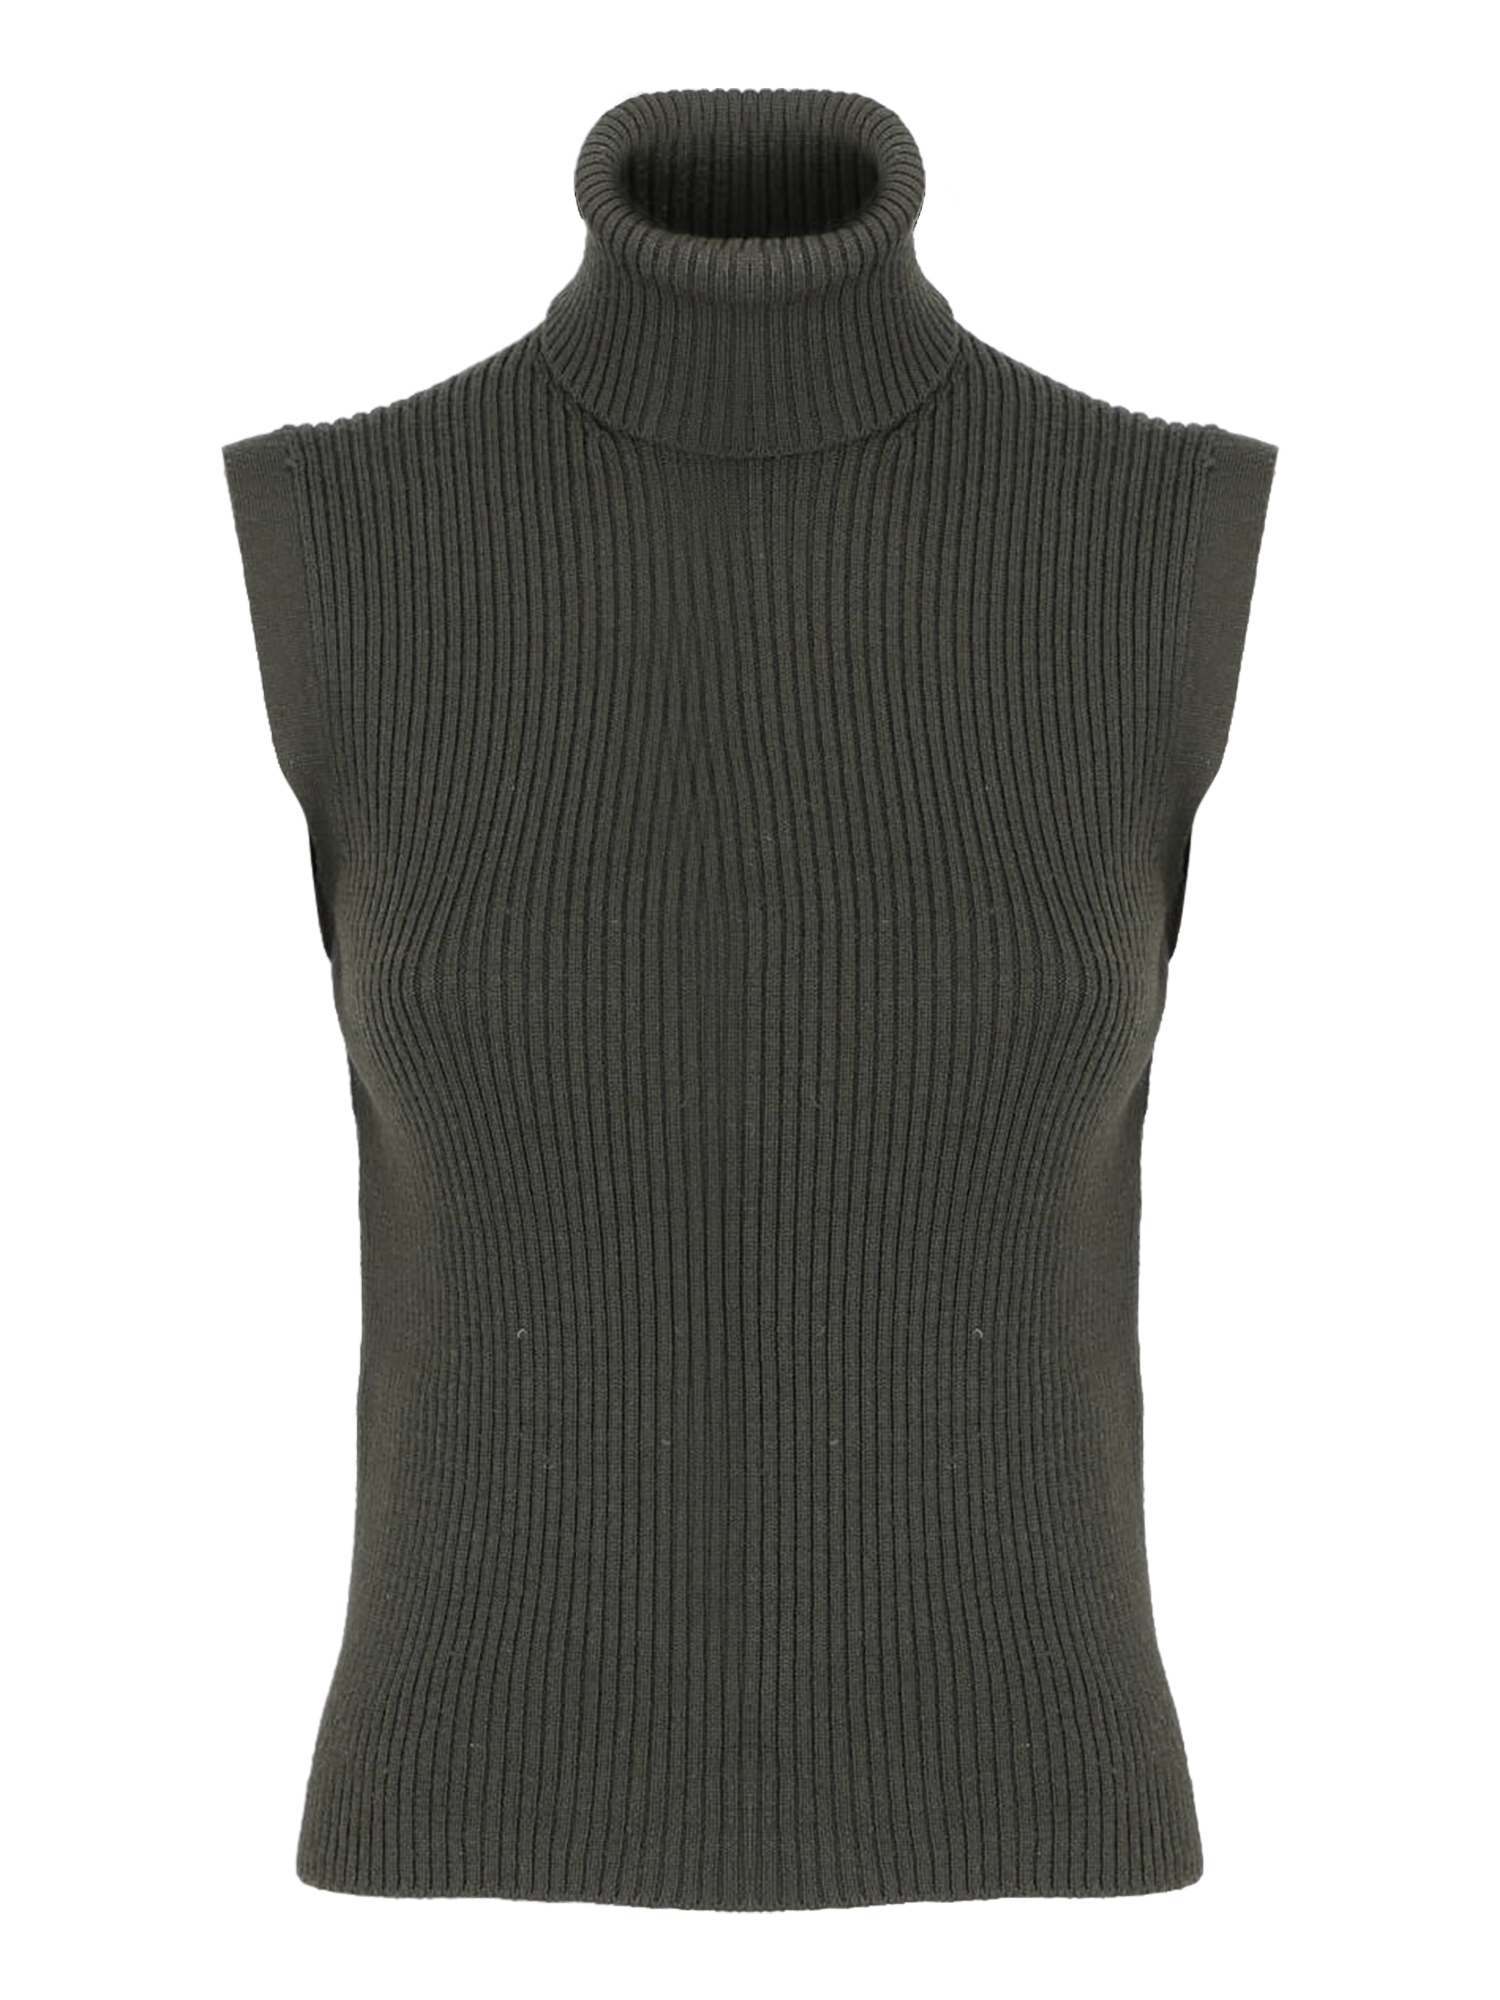 Condition: Good, Solid Color Wool, Color: Grey - S - IT 40 -